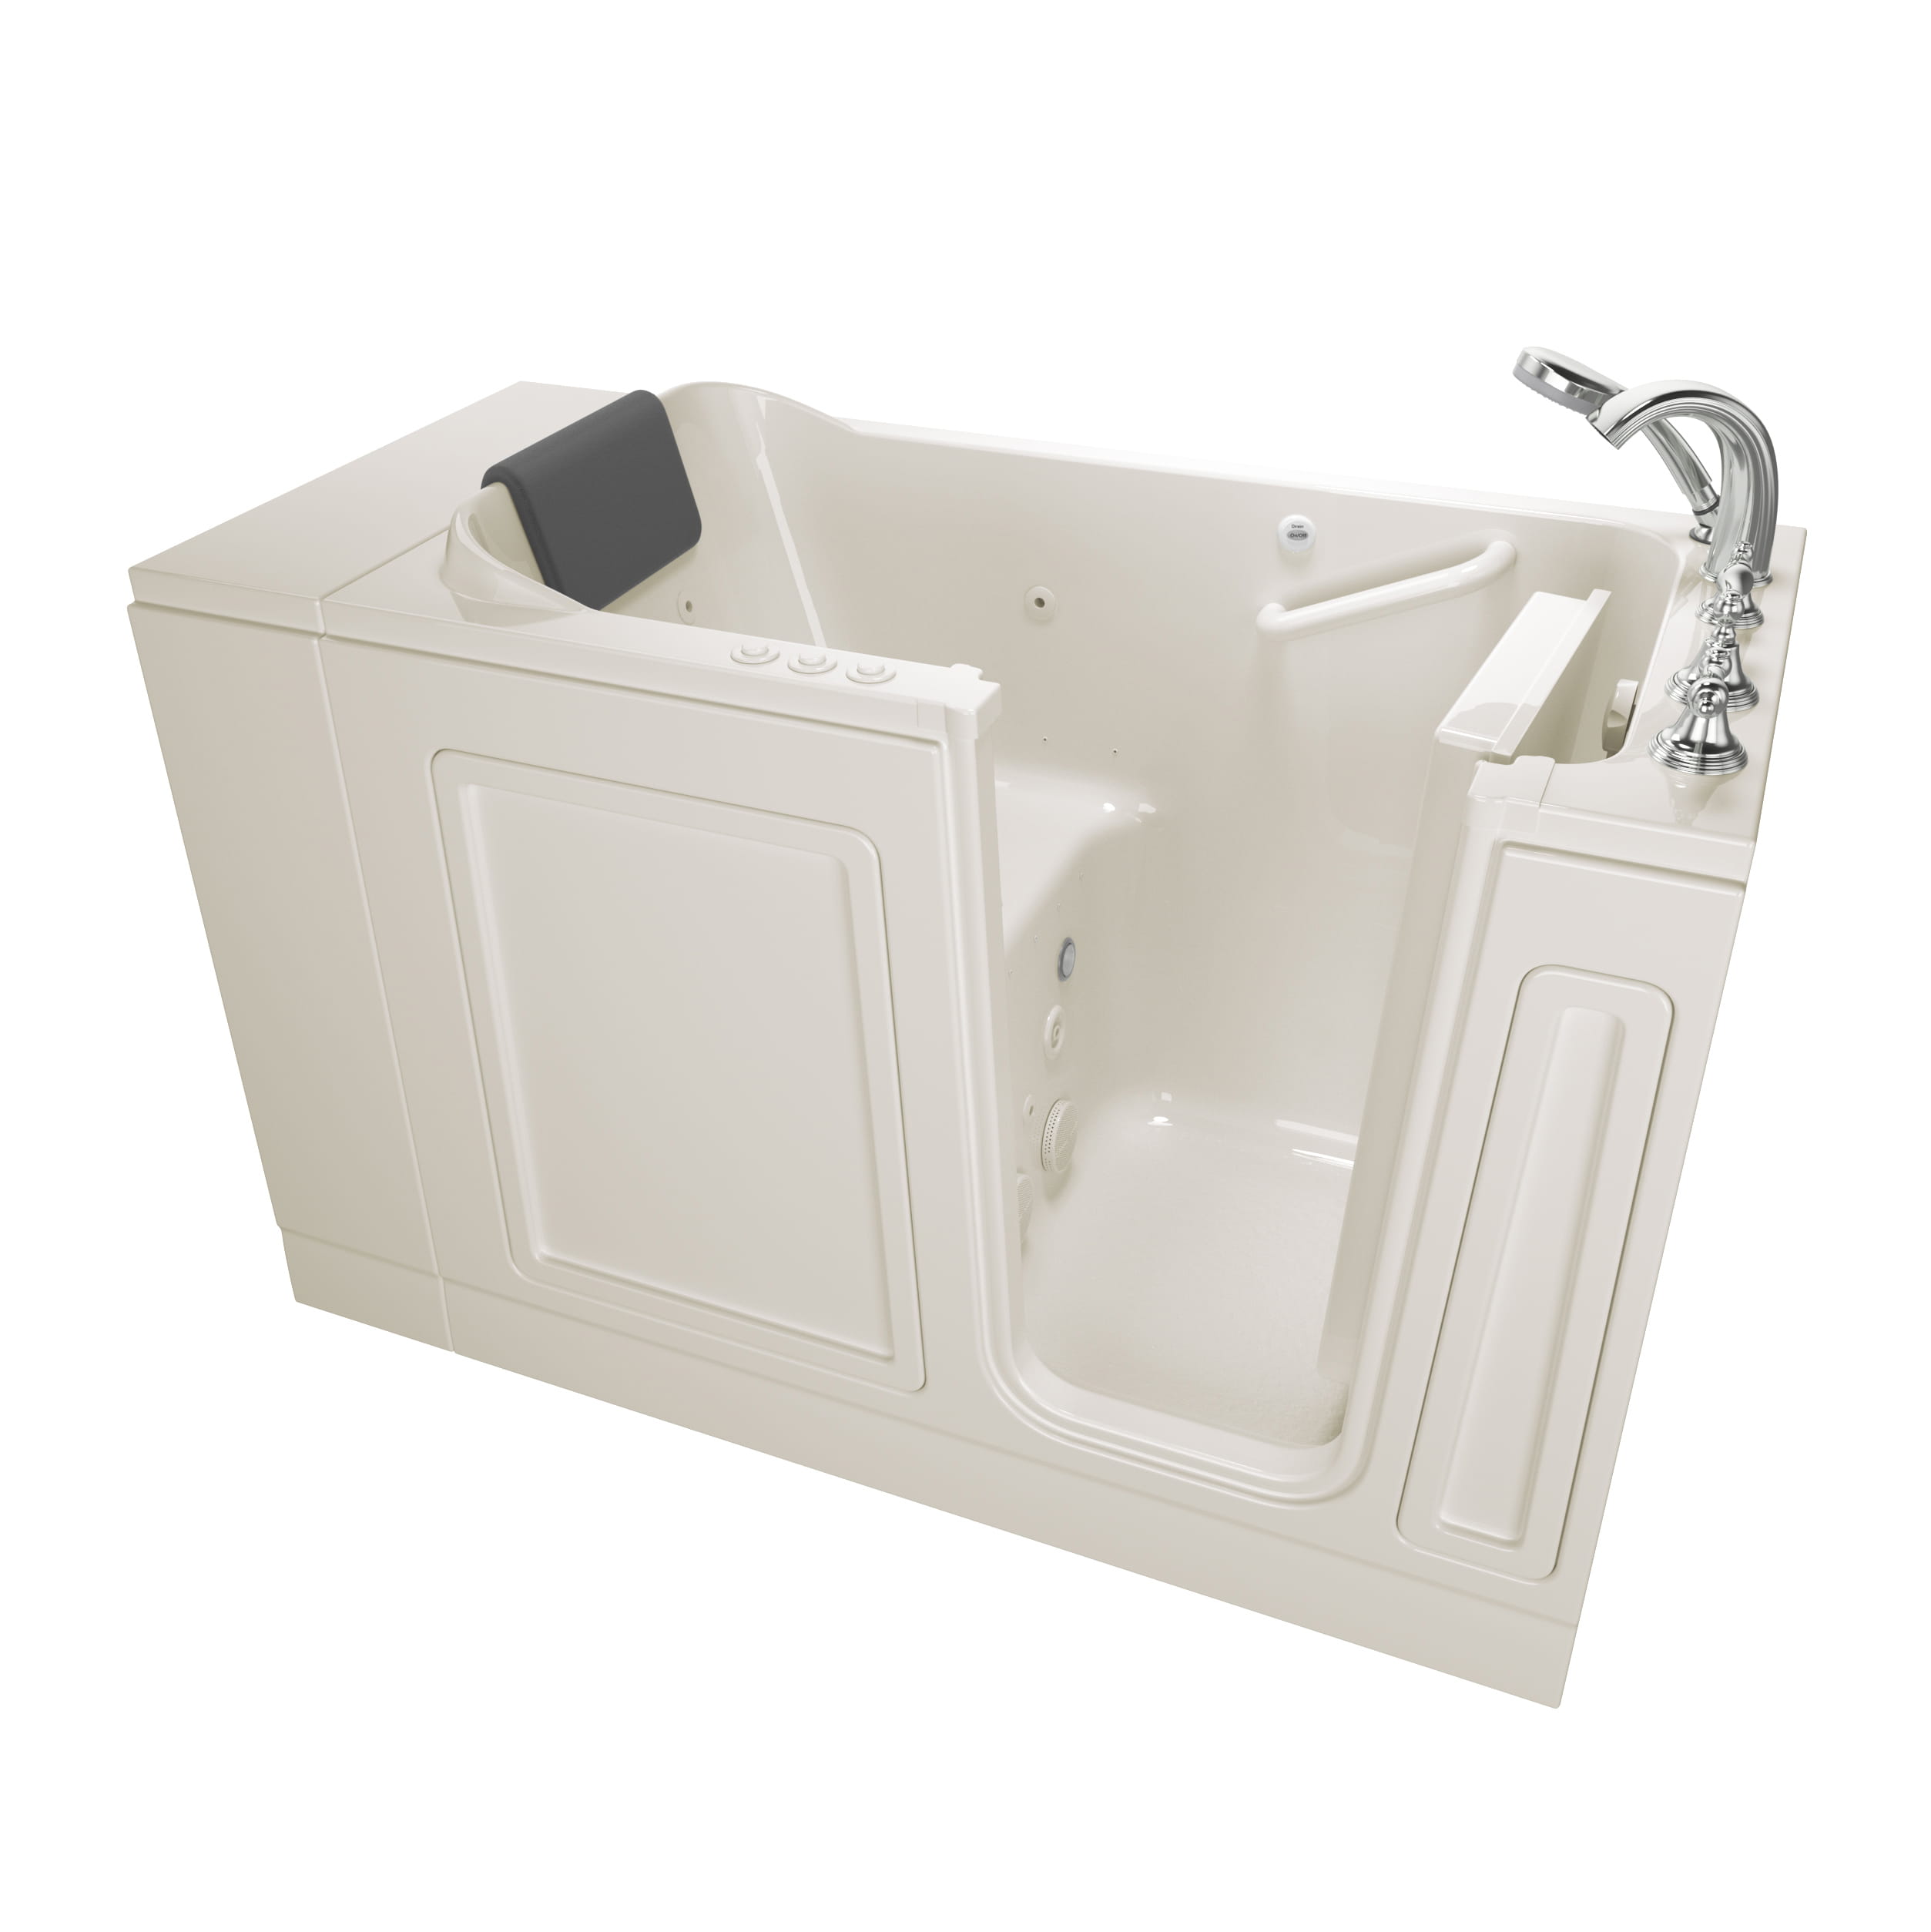 Acrylic Luxury Series 28 x 48-Inch Walk-in Tub With Combination Air Spa and Whirlpool Systems - Right-Hand Drain With Faucet